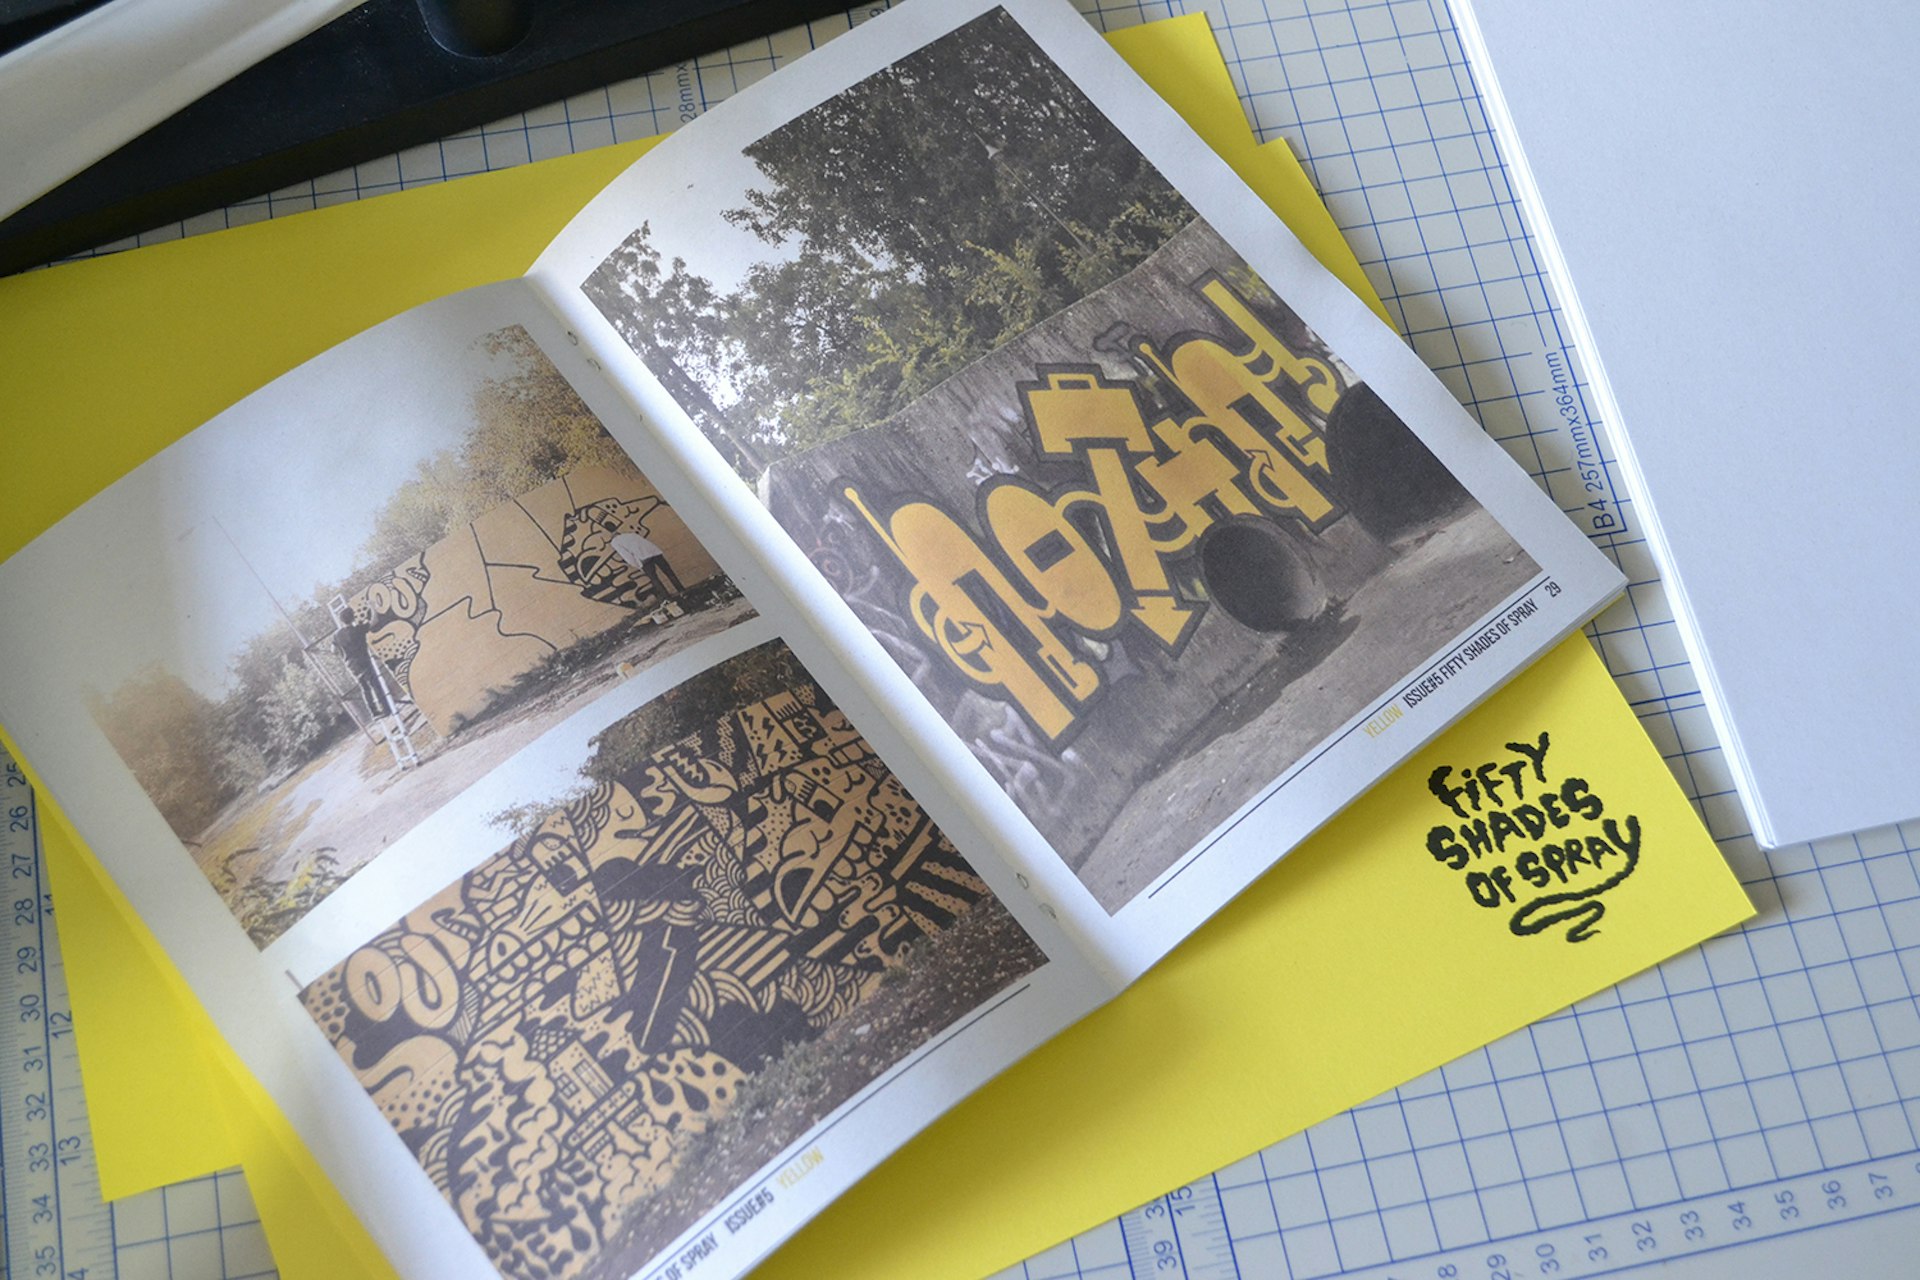 The zine exploring the world's graffiti – one colour at a time